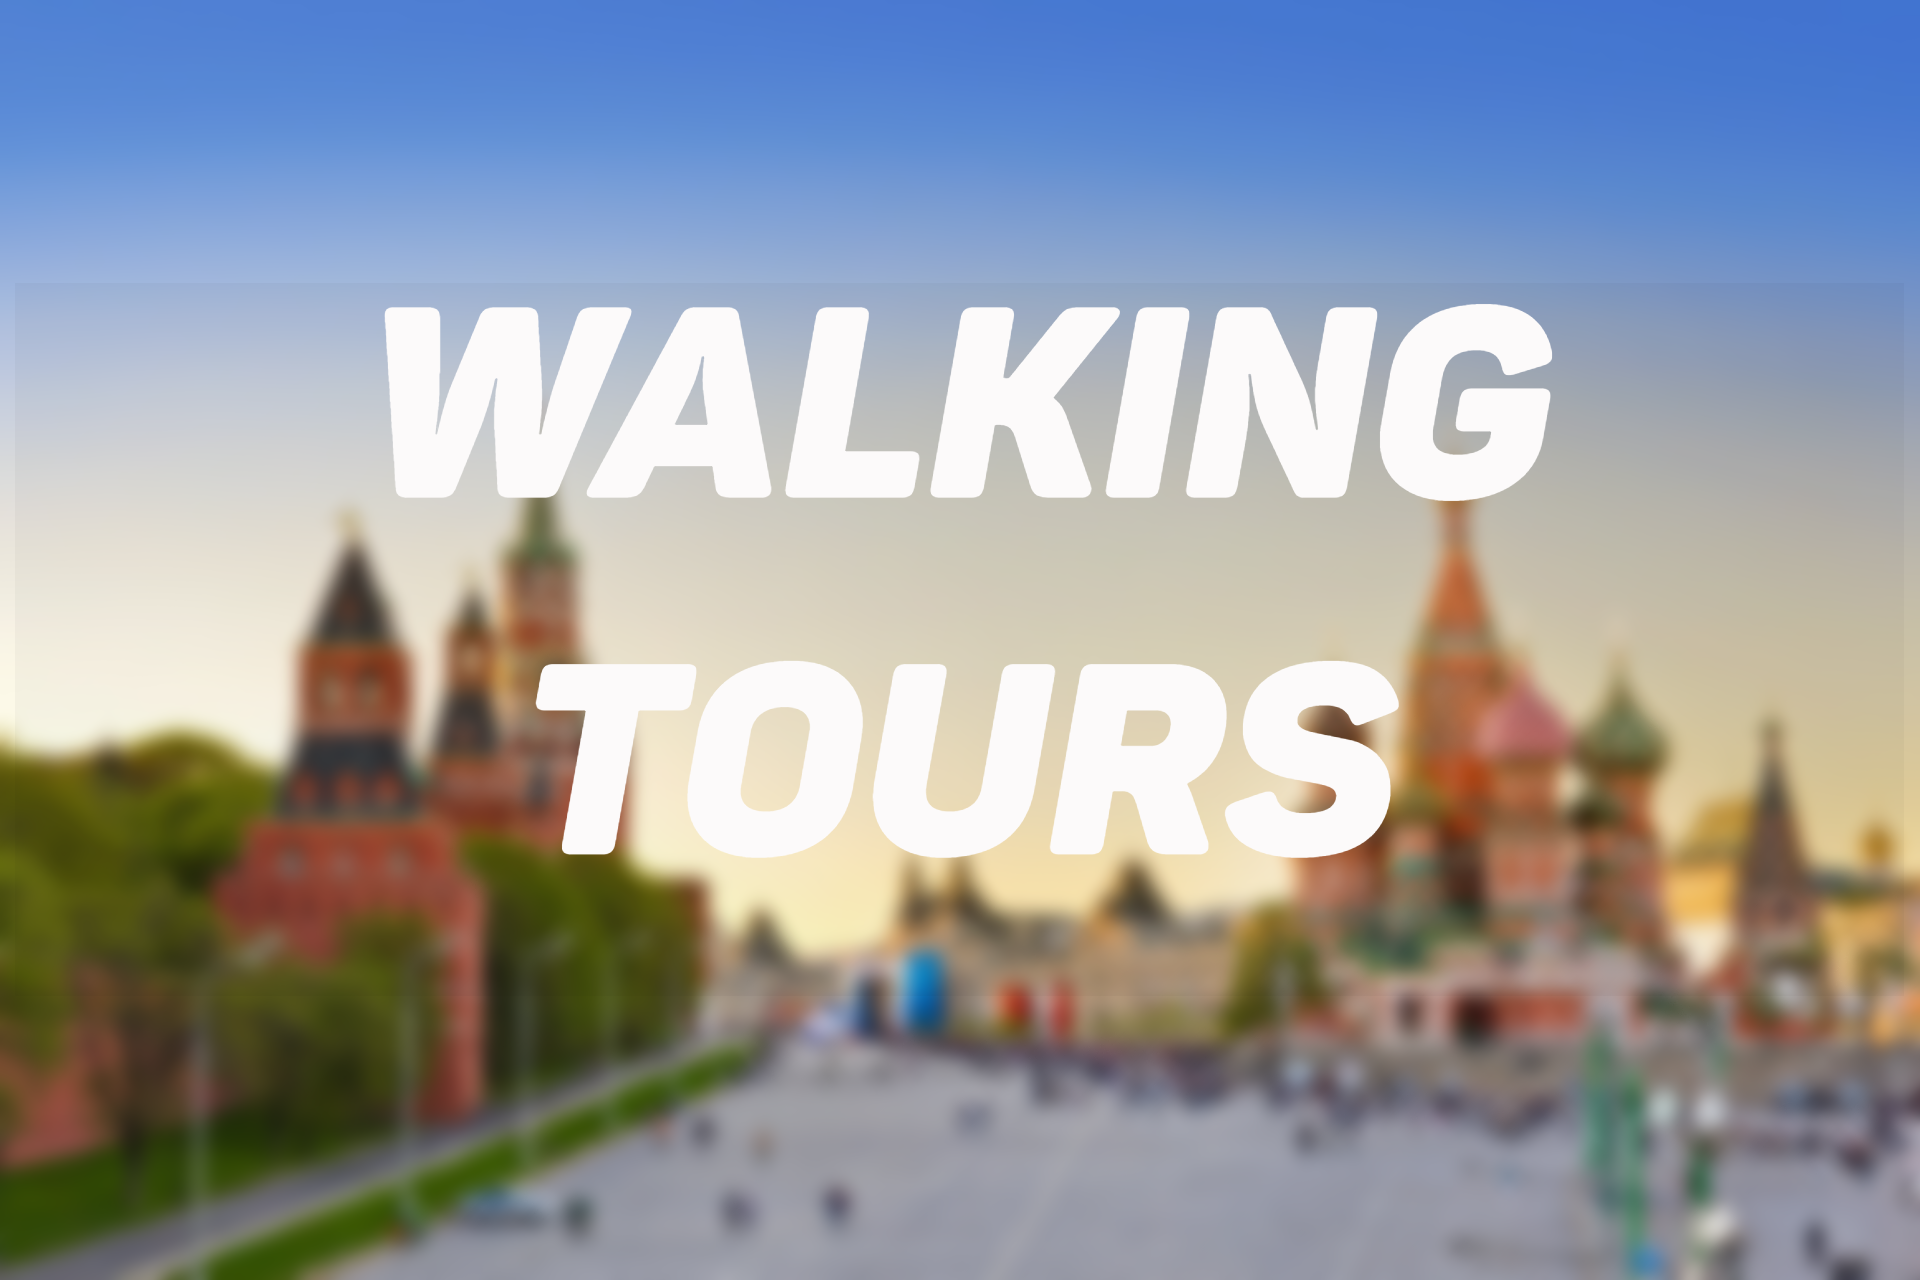 Moscow Walking Tours